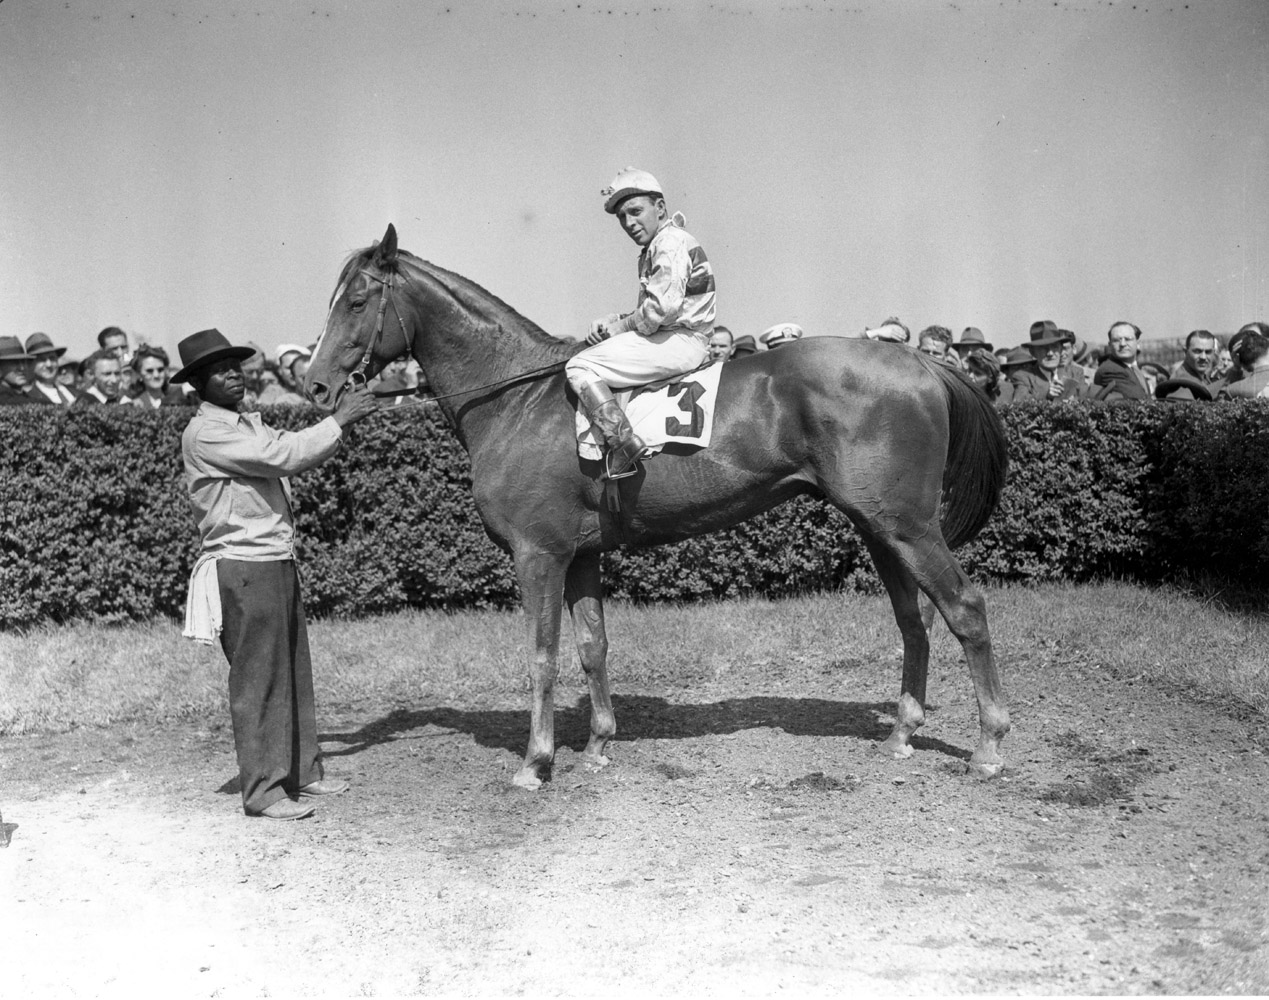 Stymie (John Adams up) in the winner's circle for the 1945 Rancocas Handicap at Jamaica, May 1945 (Keeneland Library Morgan Collection/Museum Collection)